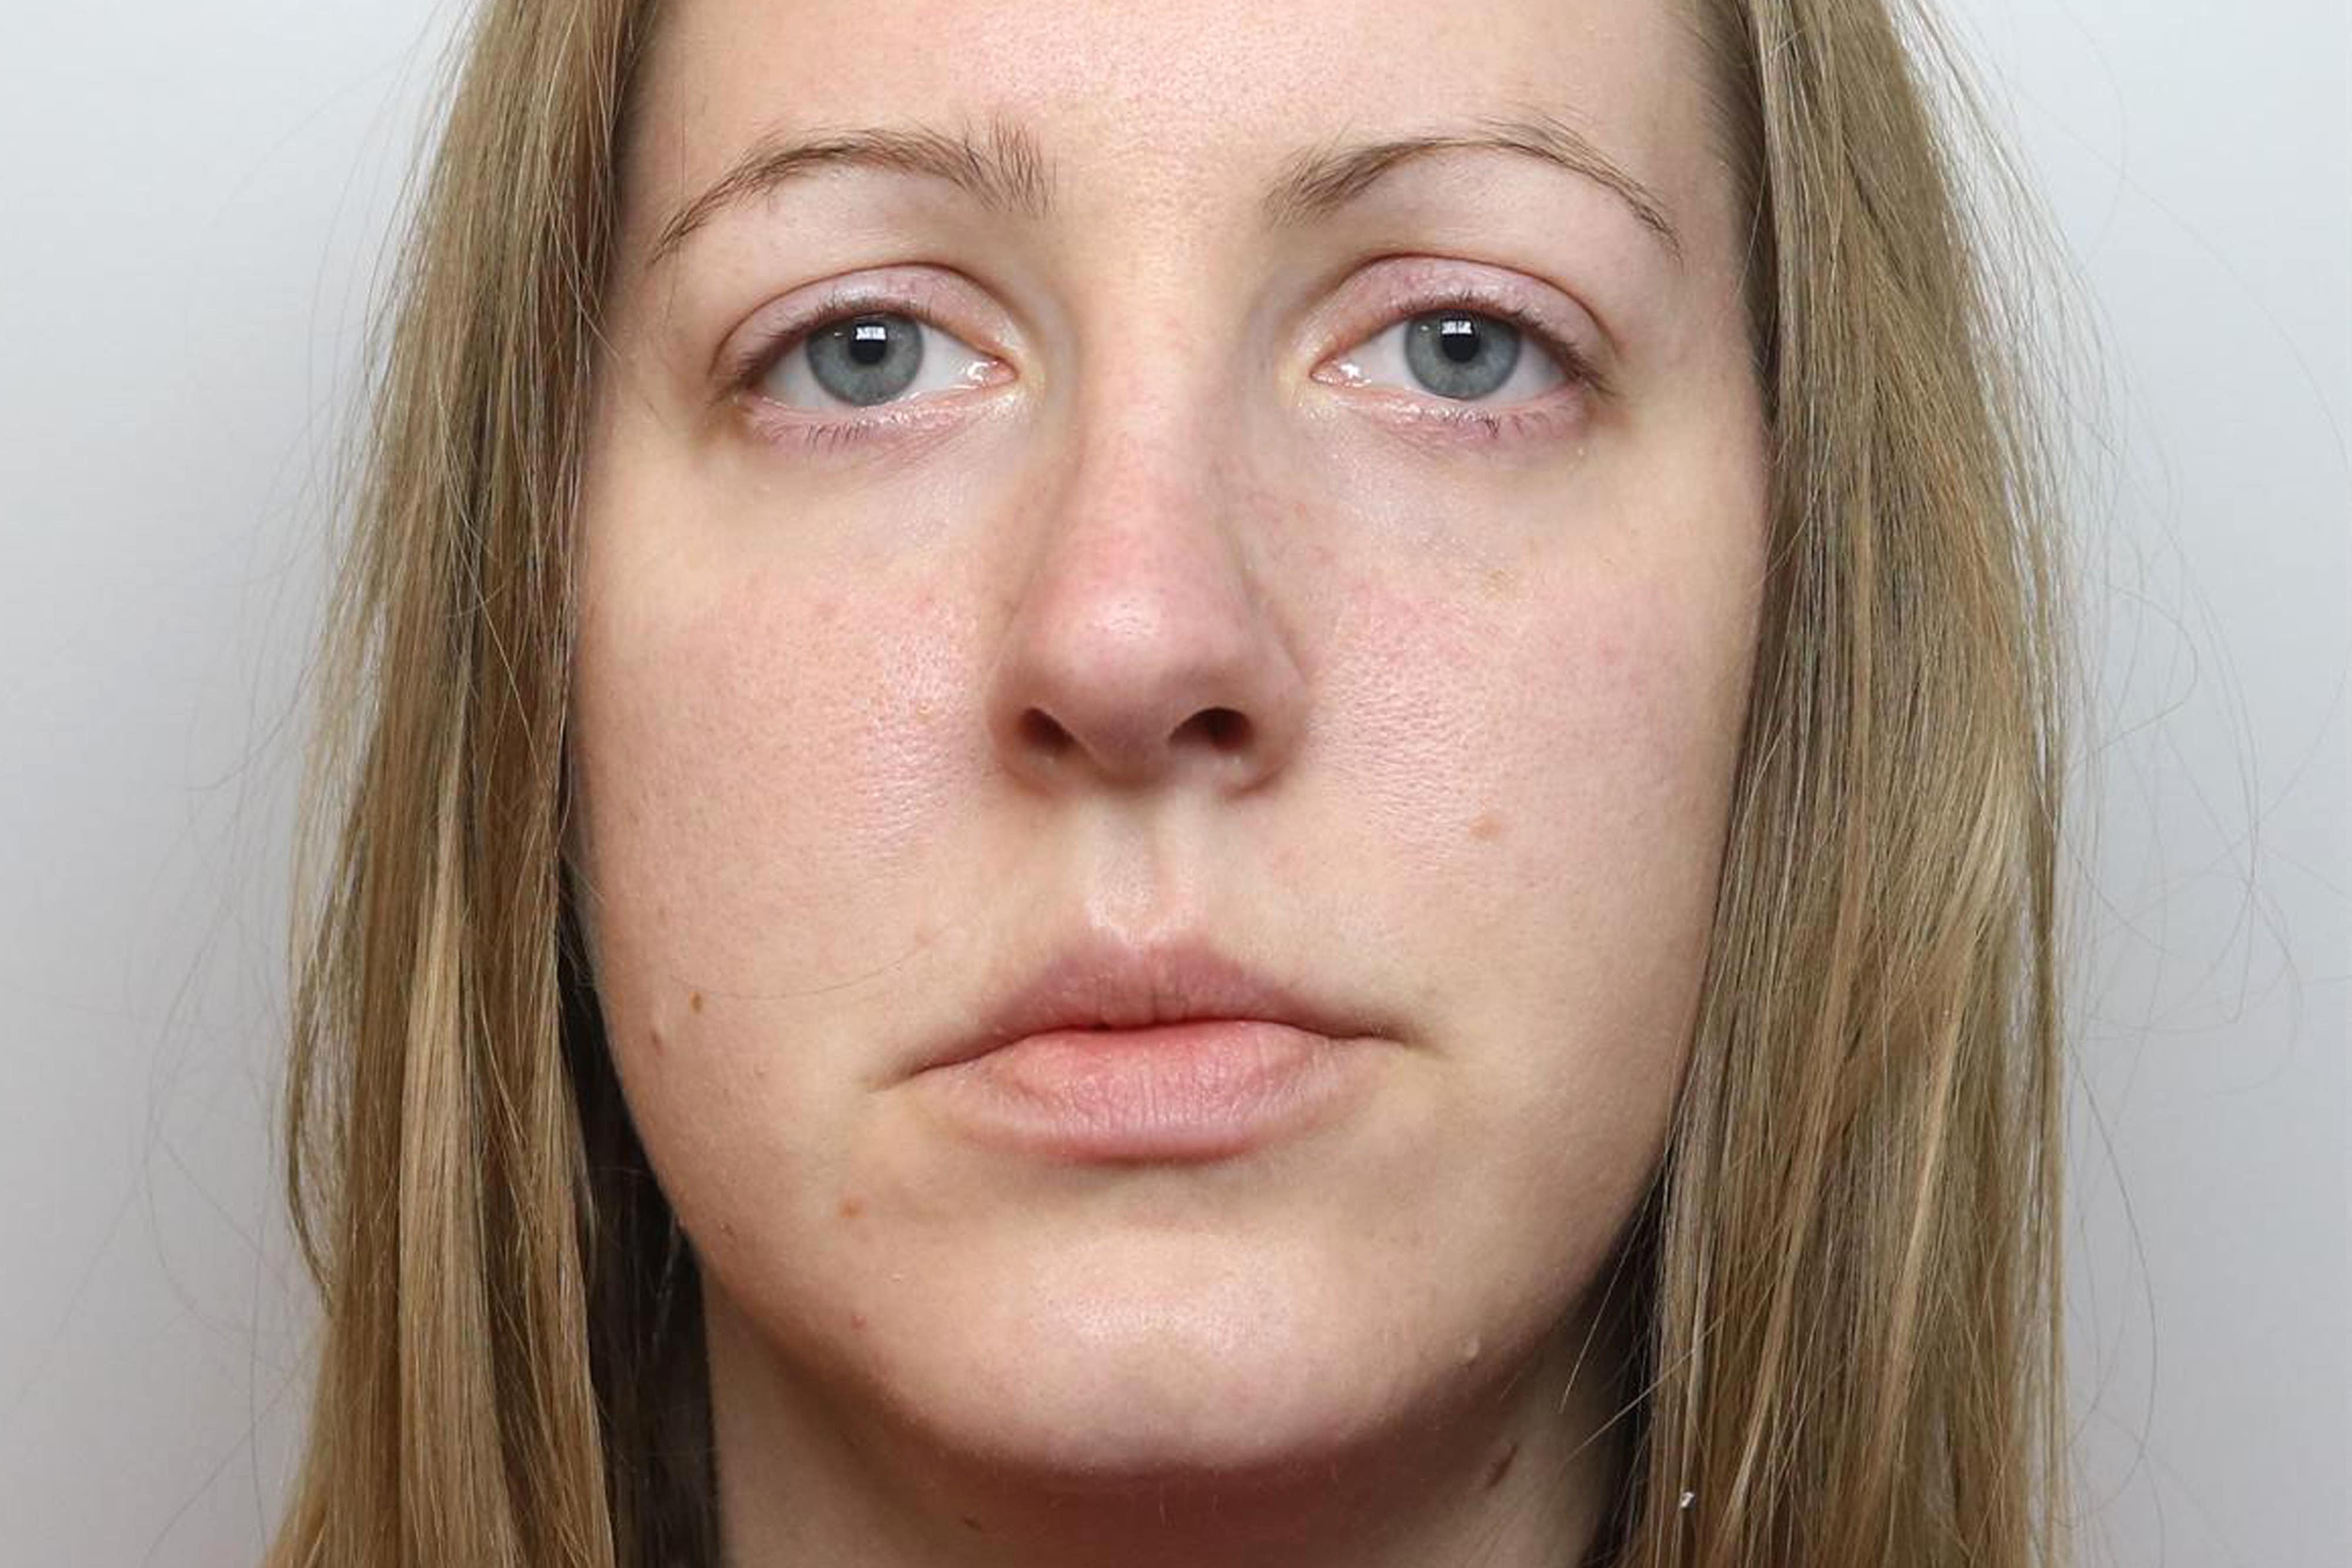 Lucy Letby last month became one of Britain’s most prolific serial killers of children